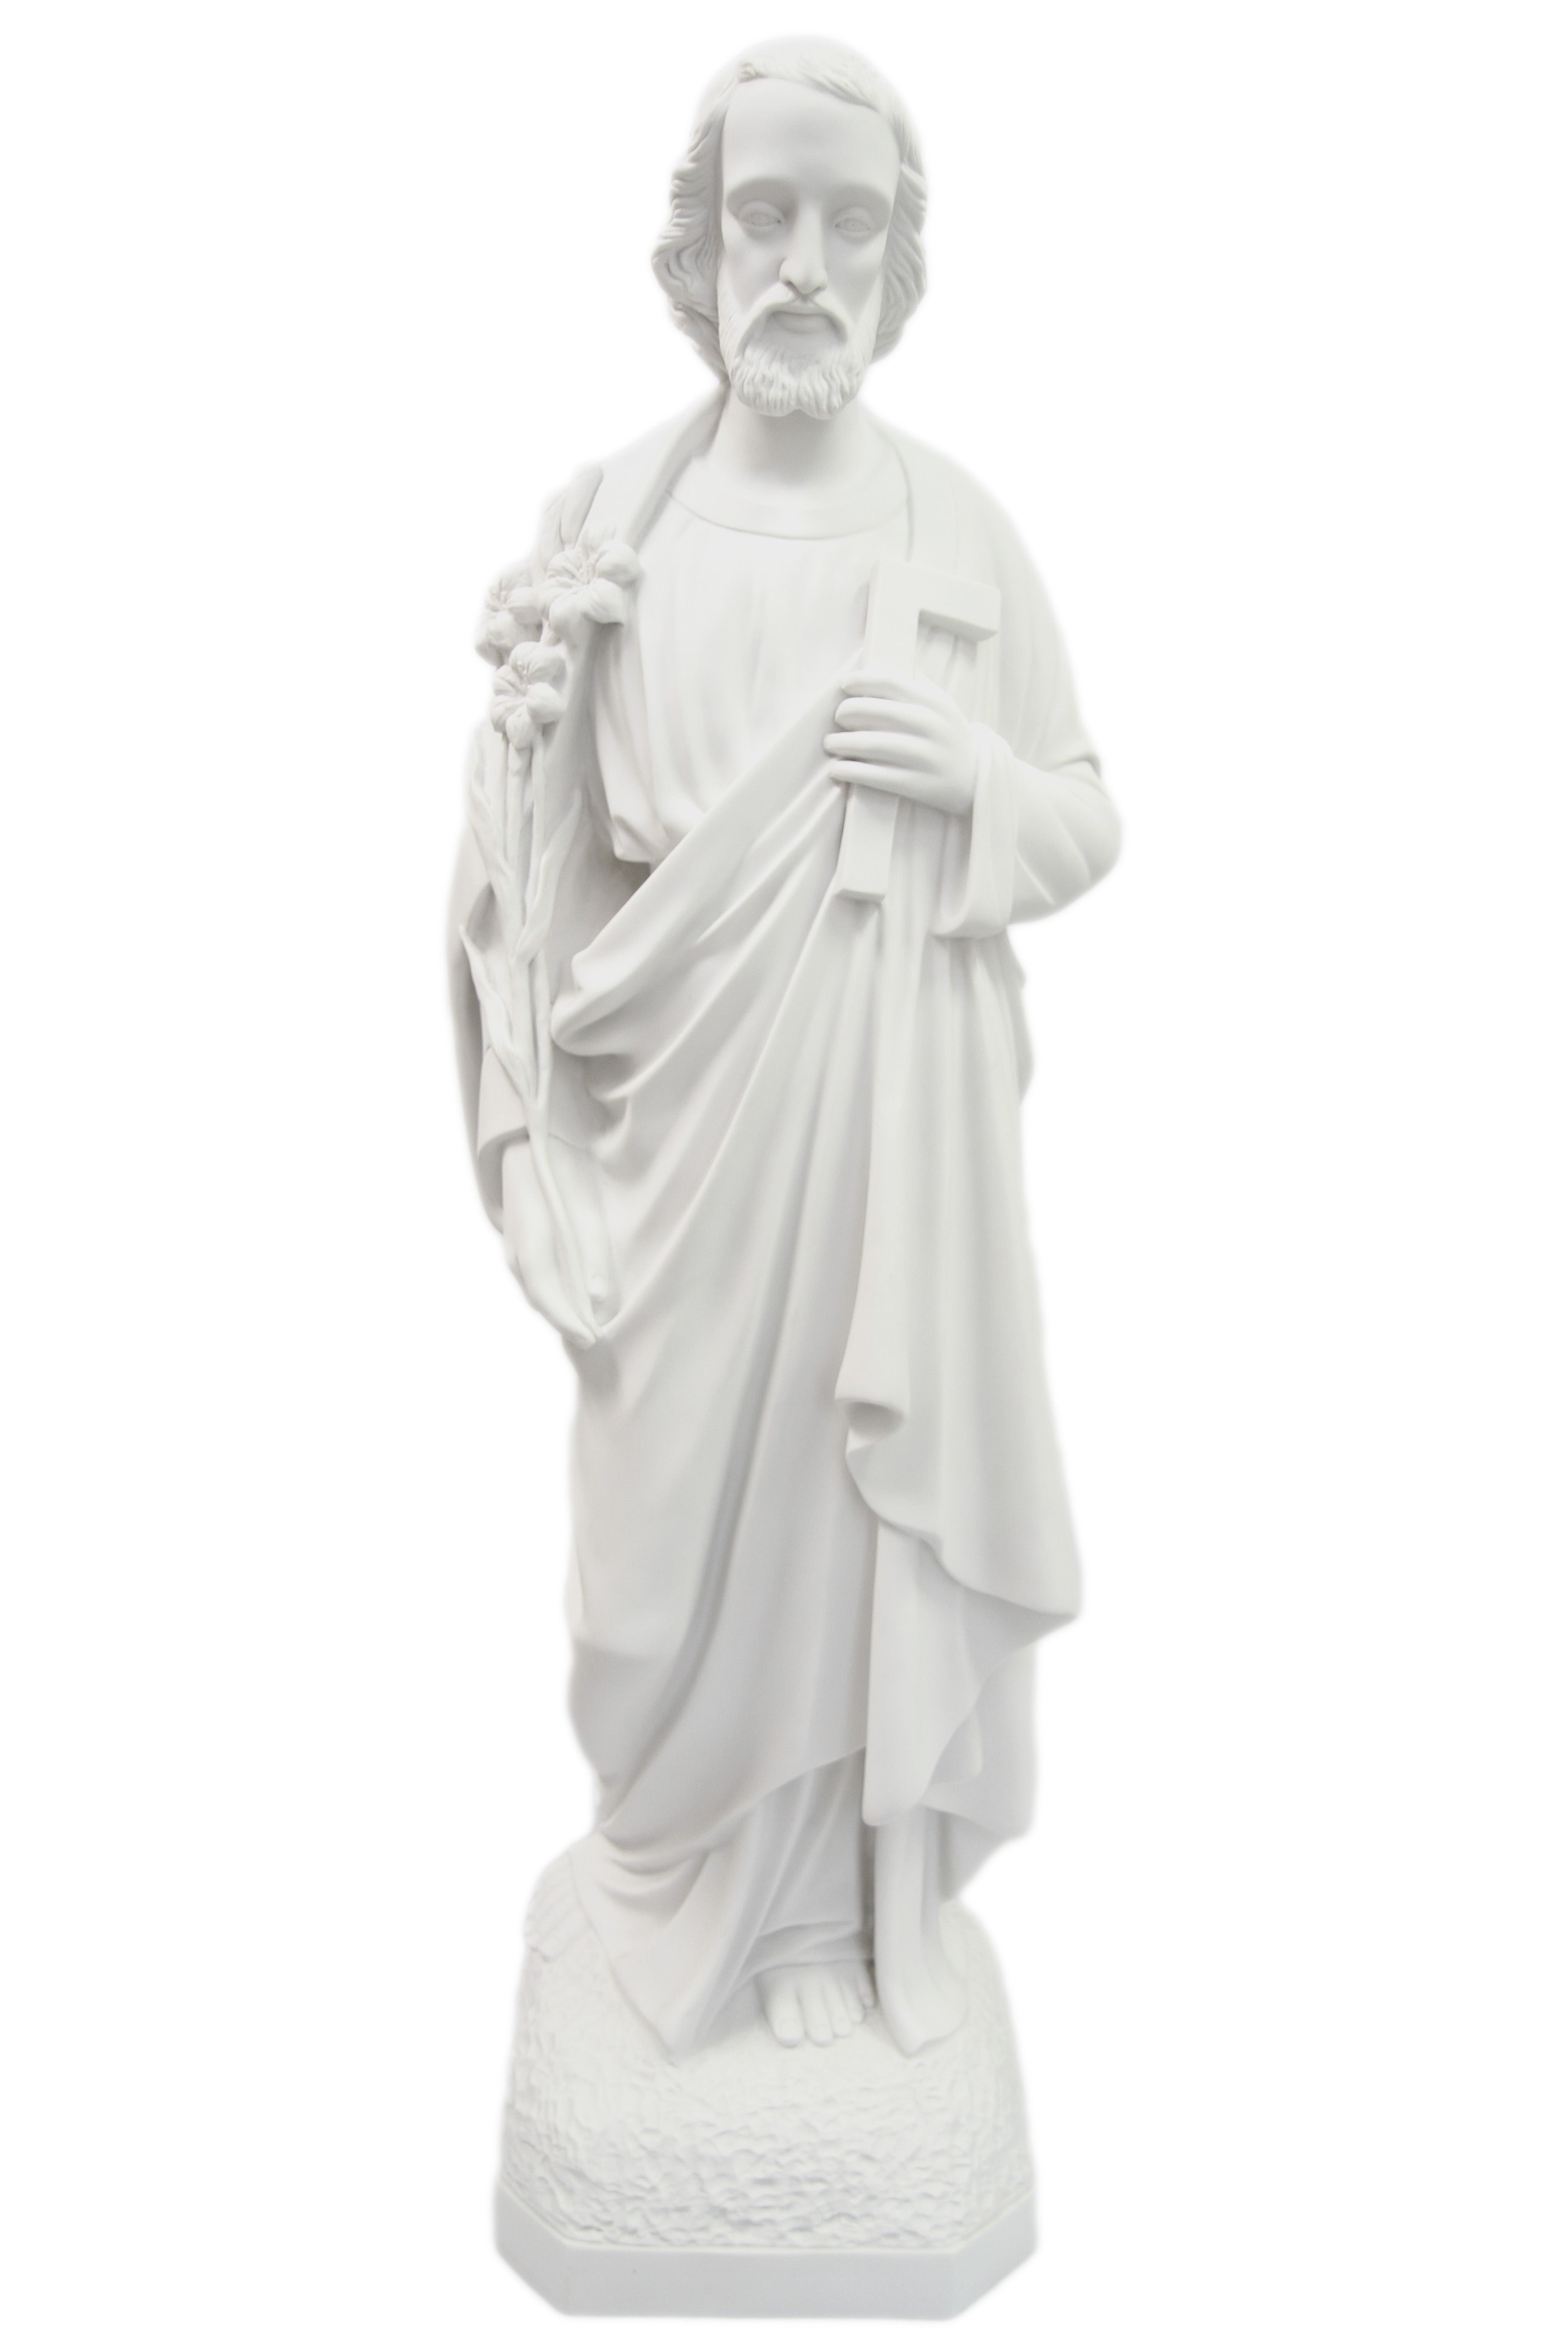 47" Saint St Joseph the Worker Catholic Statue Sculpture Vittoria Collection Made in Italy